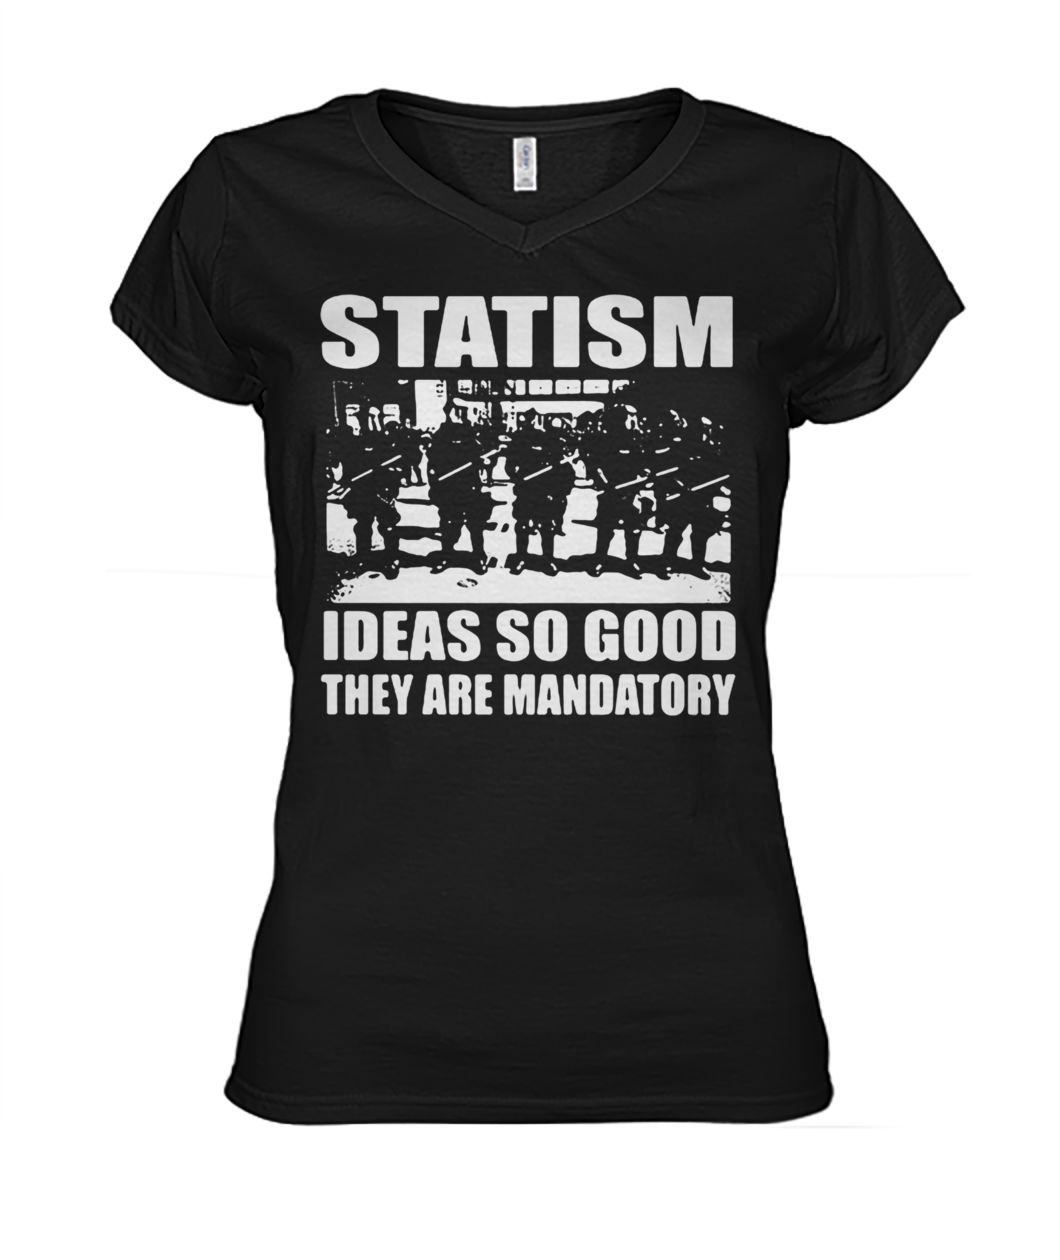 Police statism ideas so good they are mandatory women's v-neck